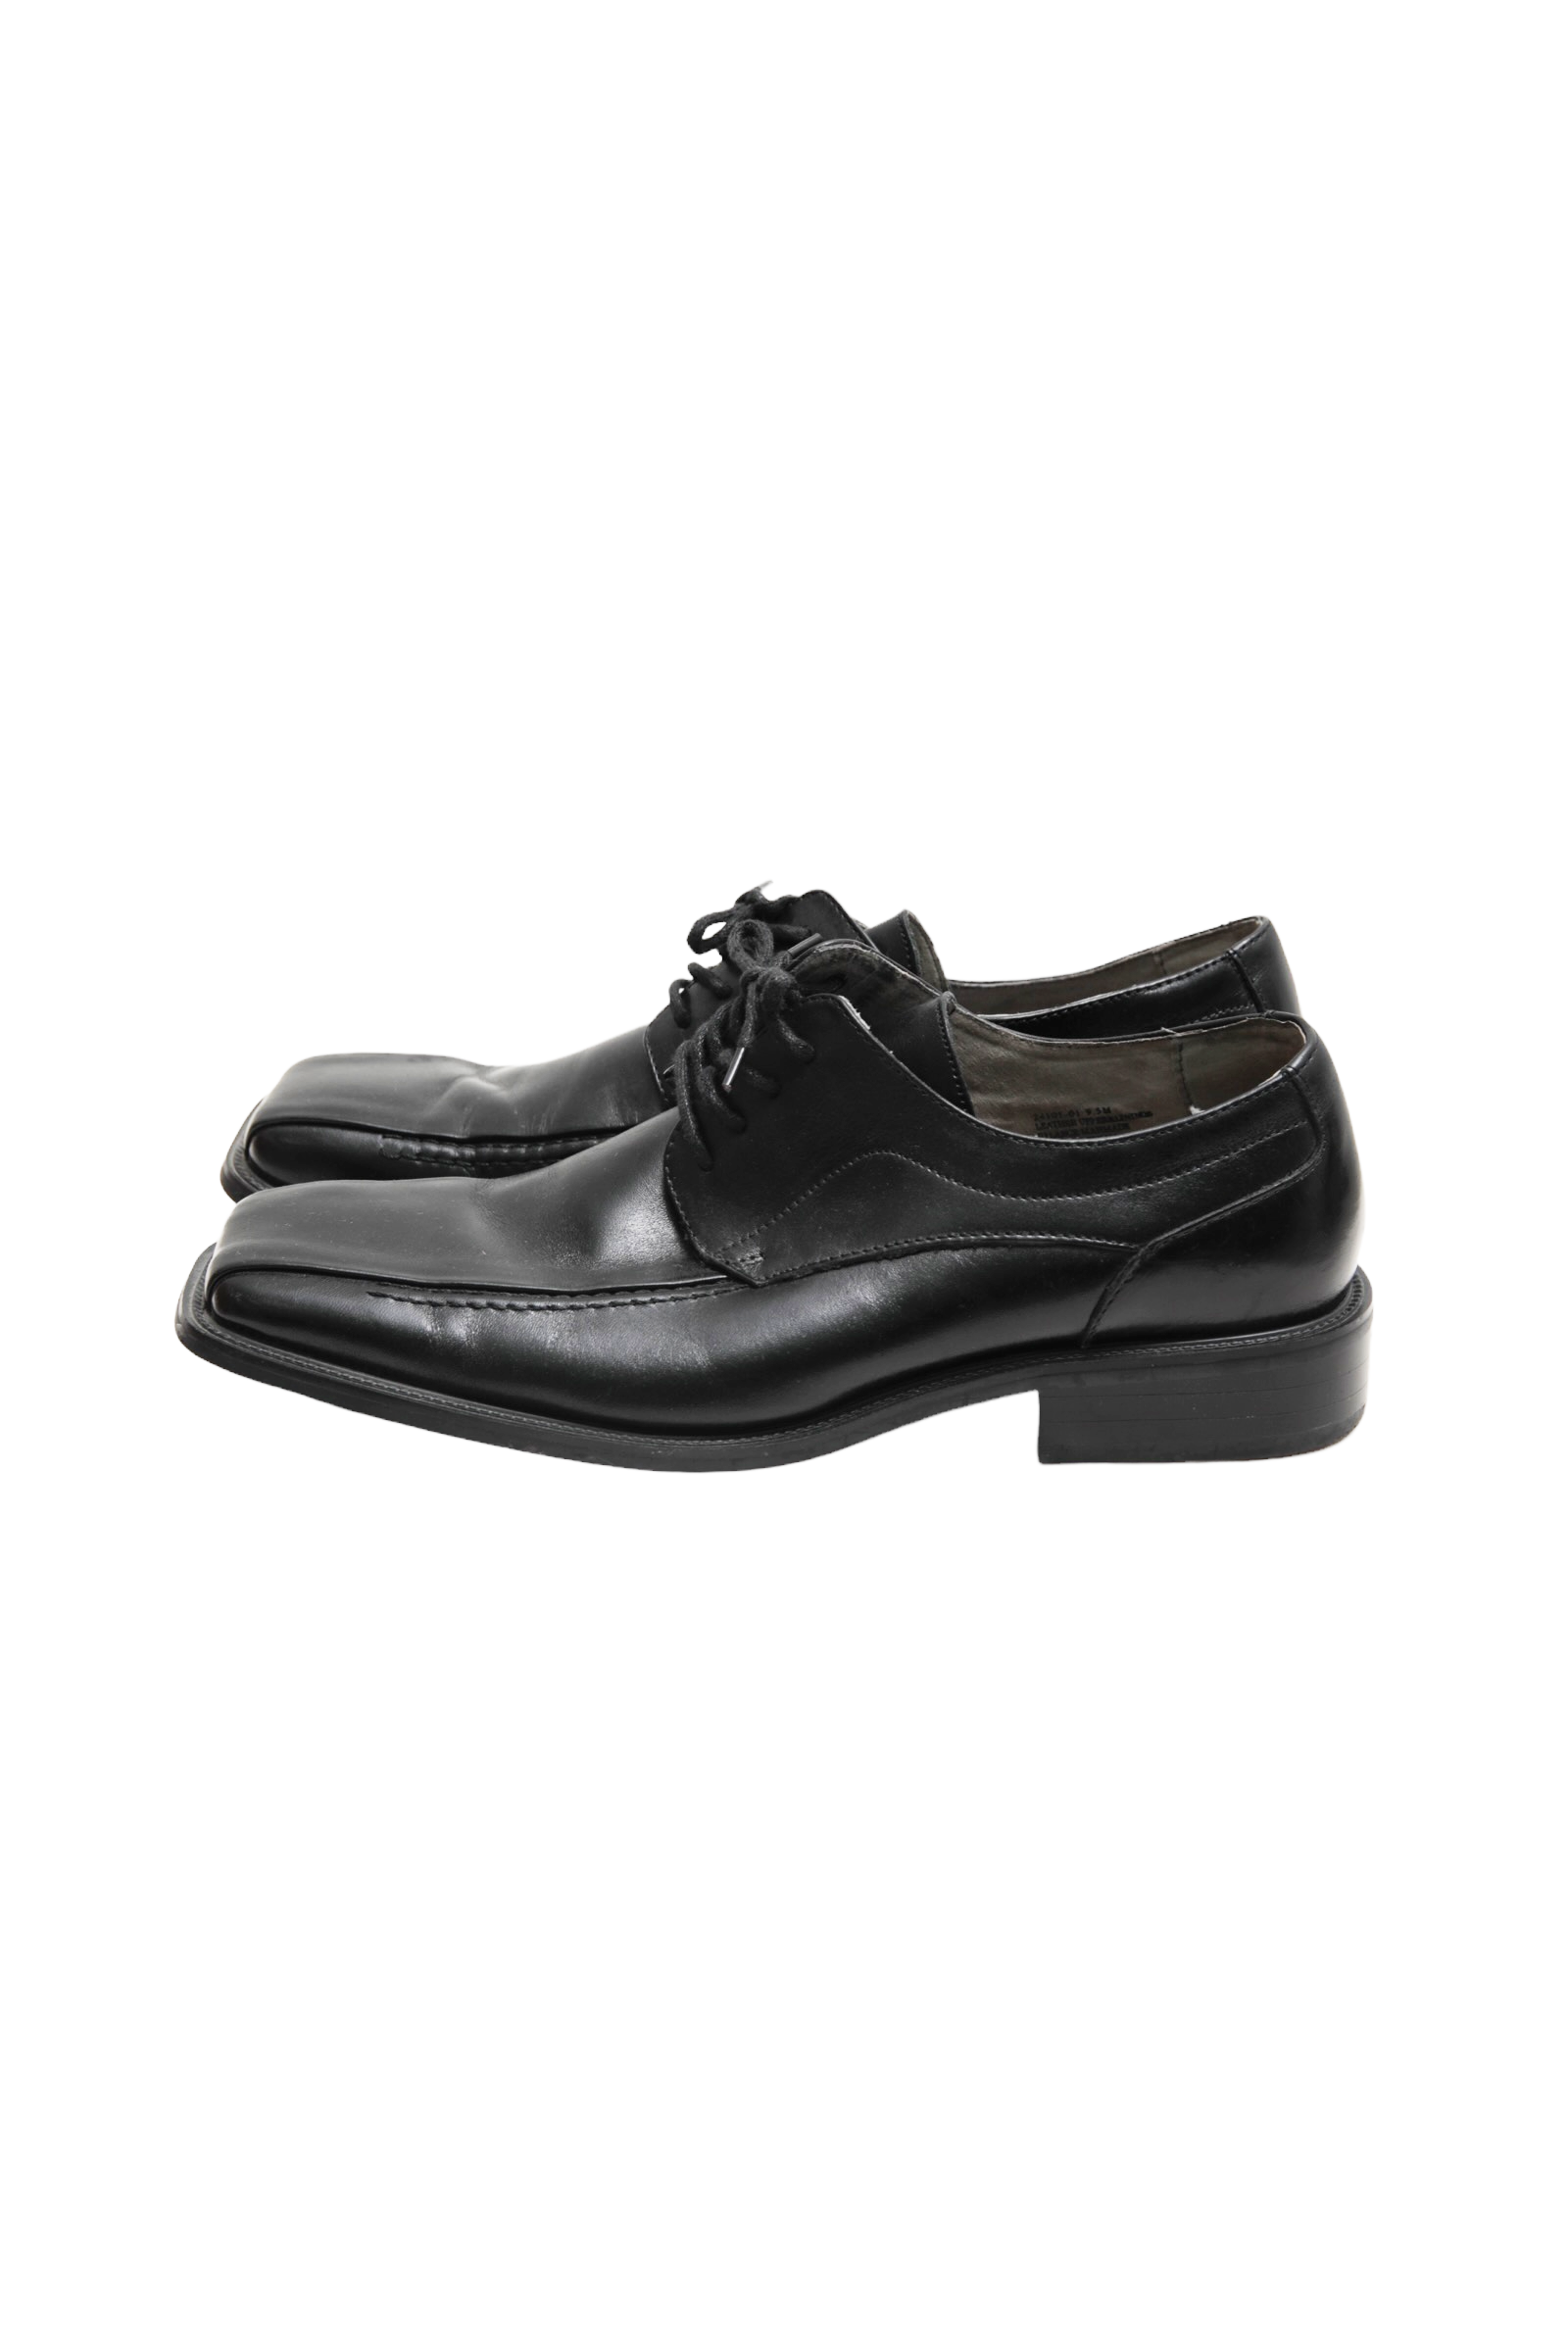 SQUARE TOE LEATHER SHOES